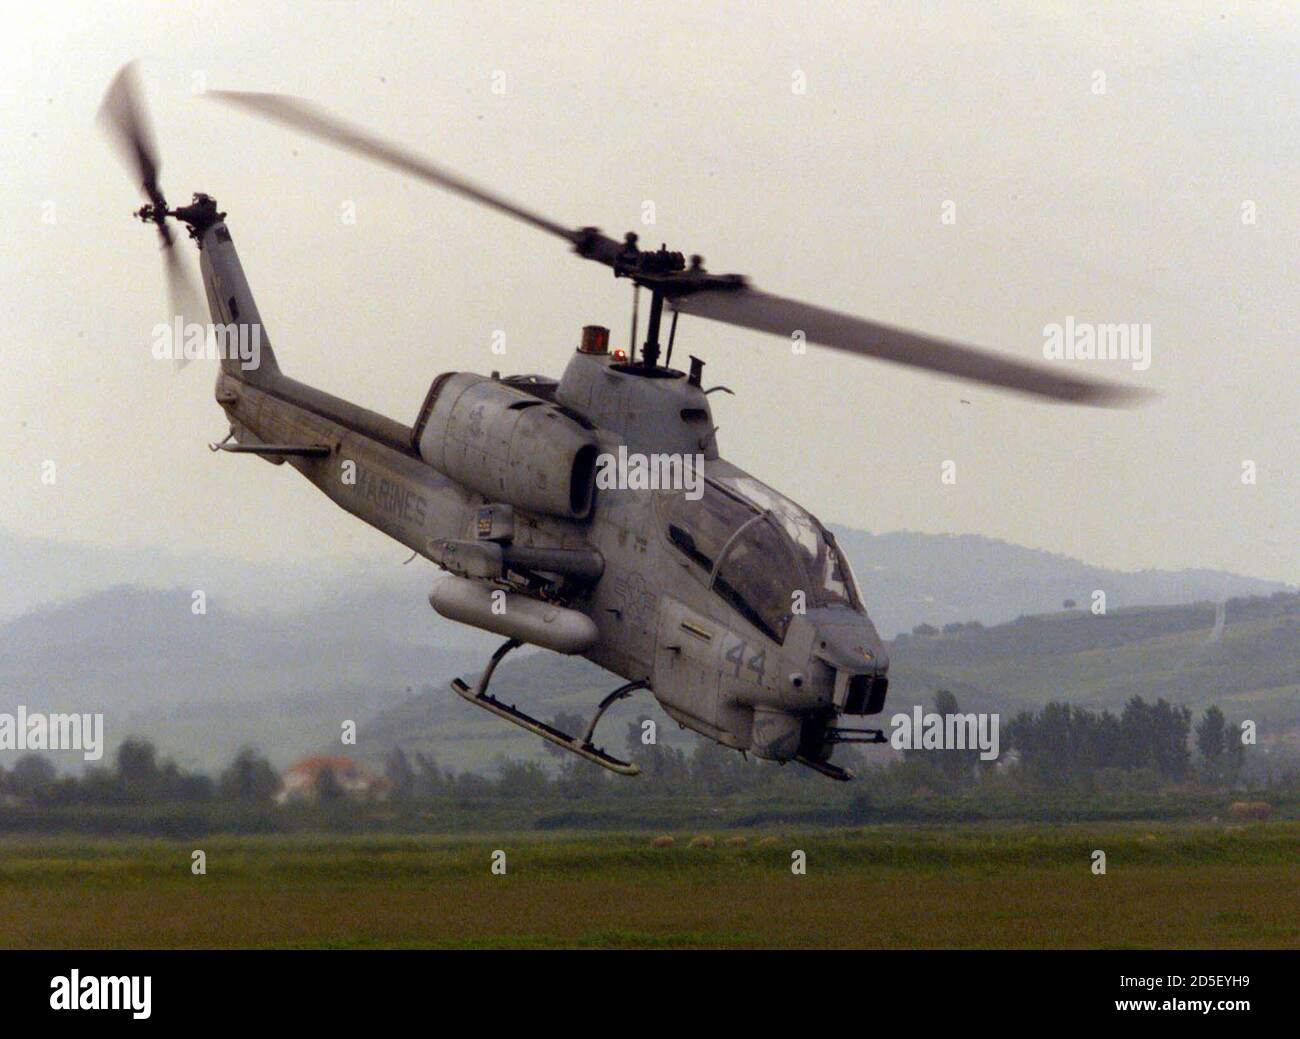 EDITORIAL USE ONLY - NO COMMERCIAL OR BOOK SALES. A U.S. Marines AH-1W Super Cobra gunship flies low over Albania May 9. The Aviation Combat Element (ACE) for the 26th Marine Expeditionary Unit (MEU) includes 12 CH-46E Sea Knight transport chopers, four CH-53E Super Stallion heavy-lift chopers, four AH-1W Super Cobra gunships, two UH-1N utility chopers and six AV-8B Harrier attack jets.    YB/GB Stock Photo